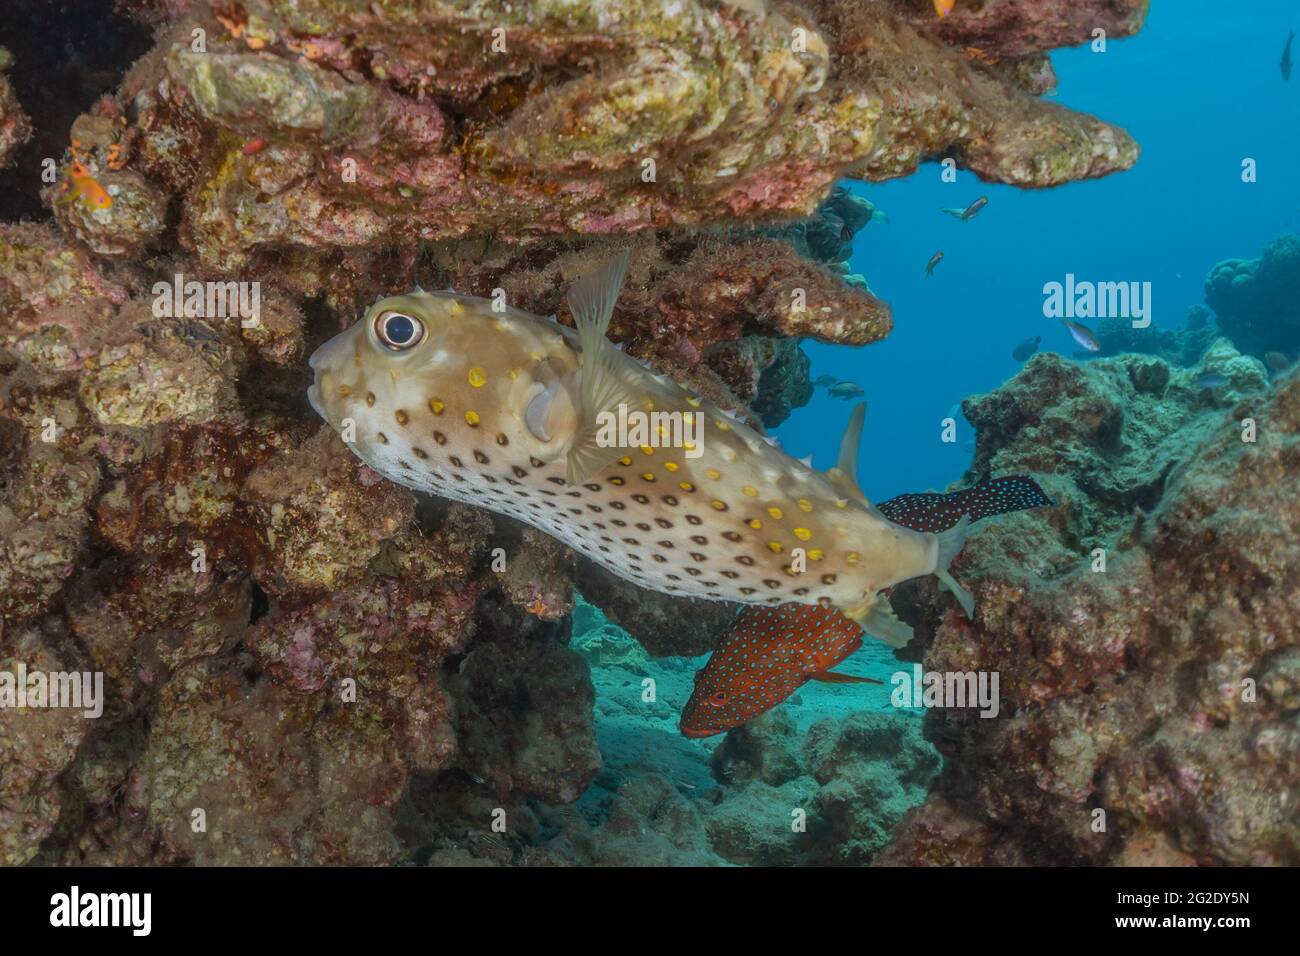 Fish swim in the Red Sea, colorful fish, Eilat Israel Stock Photo